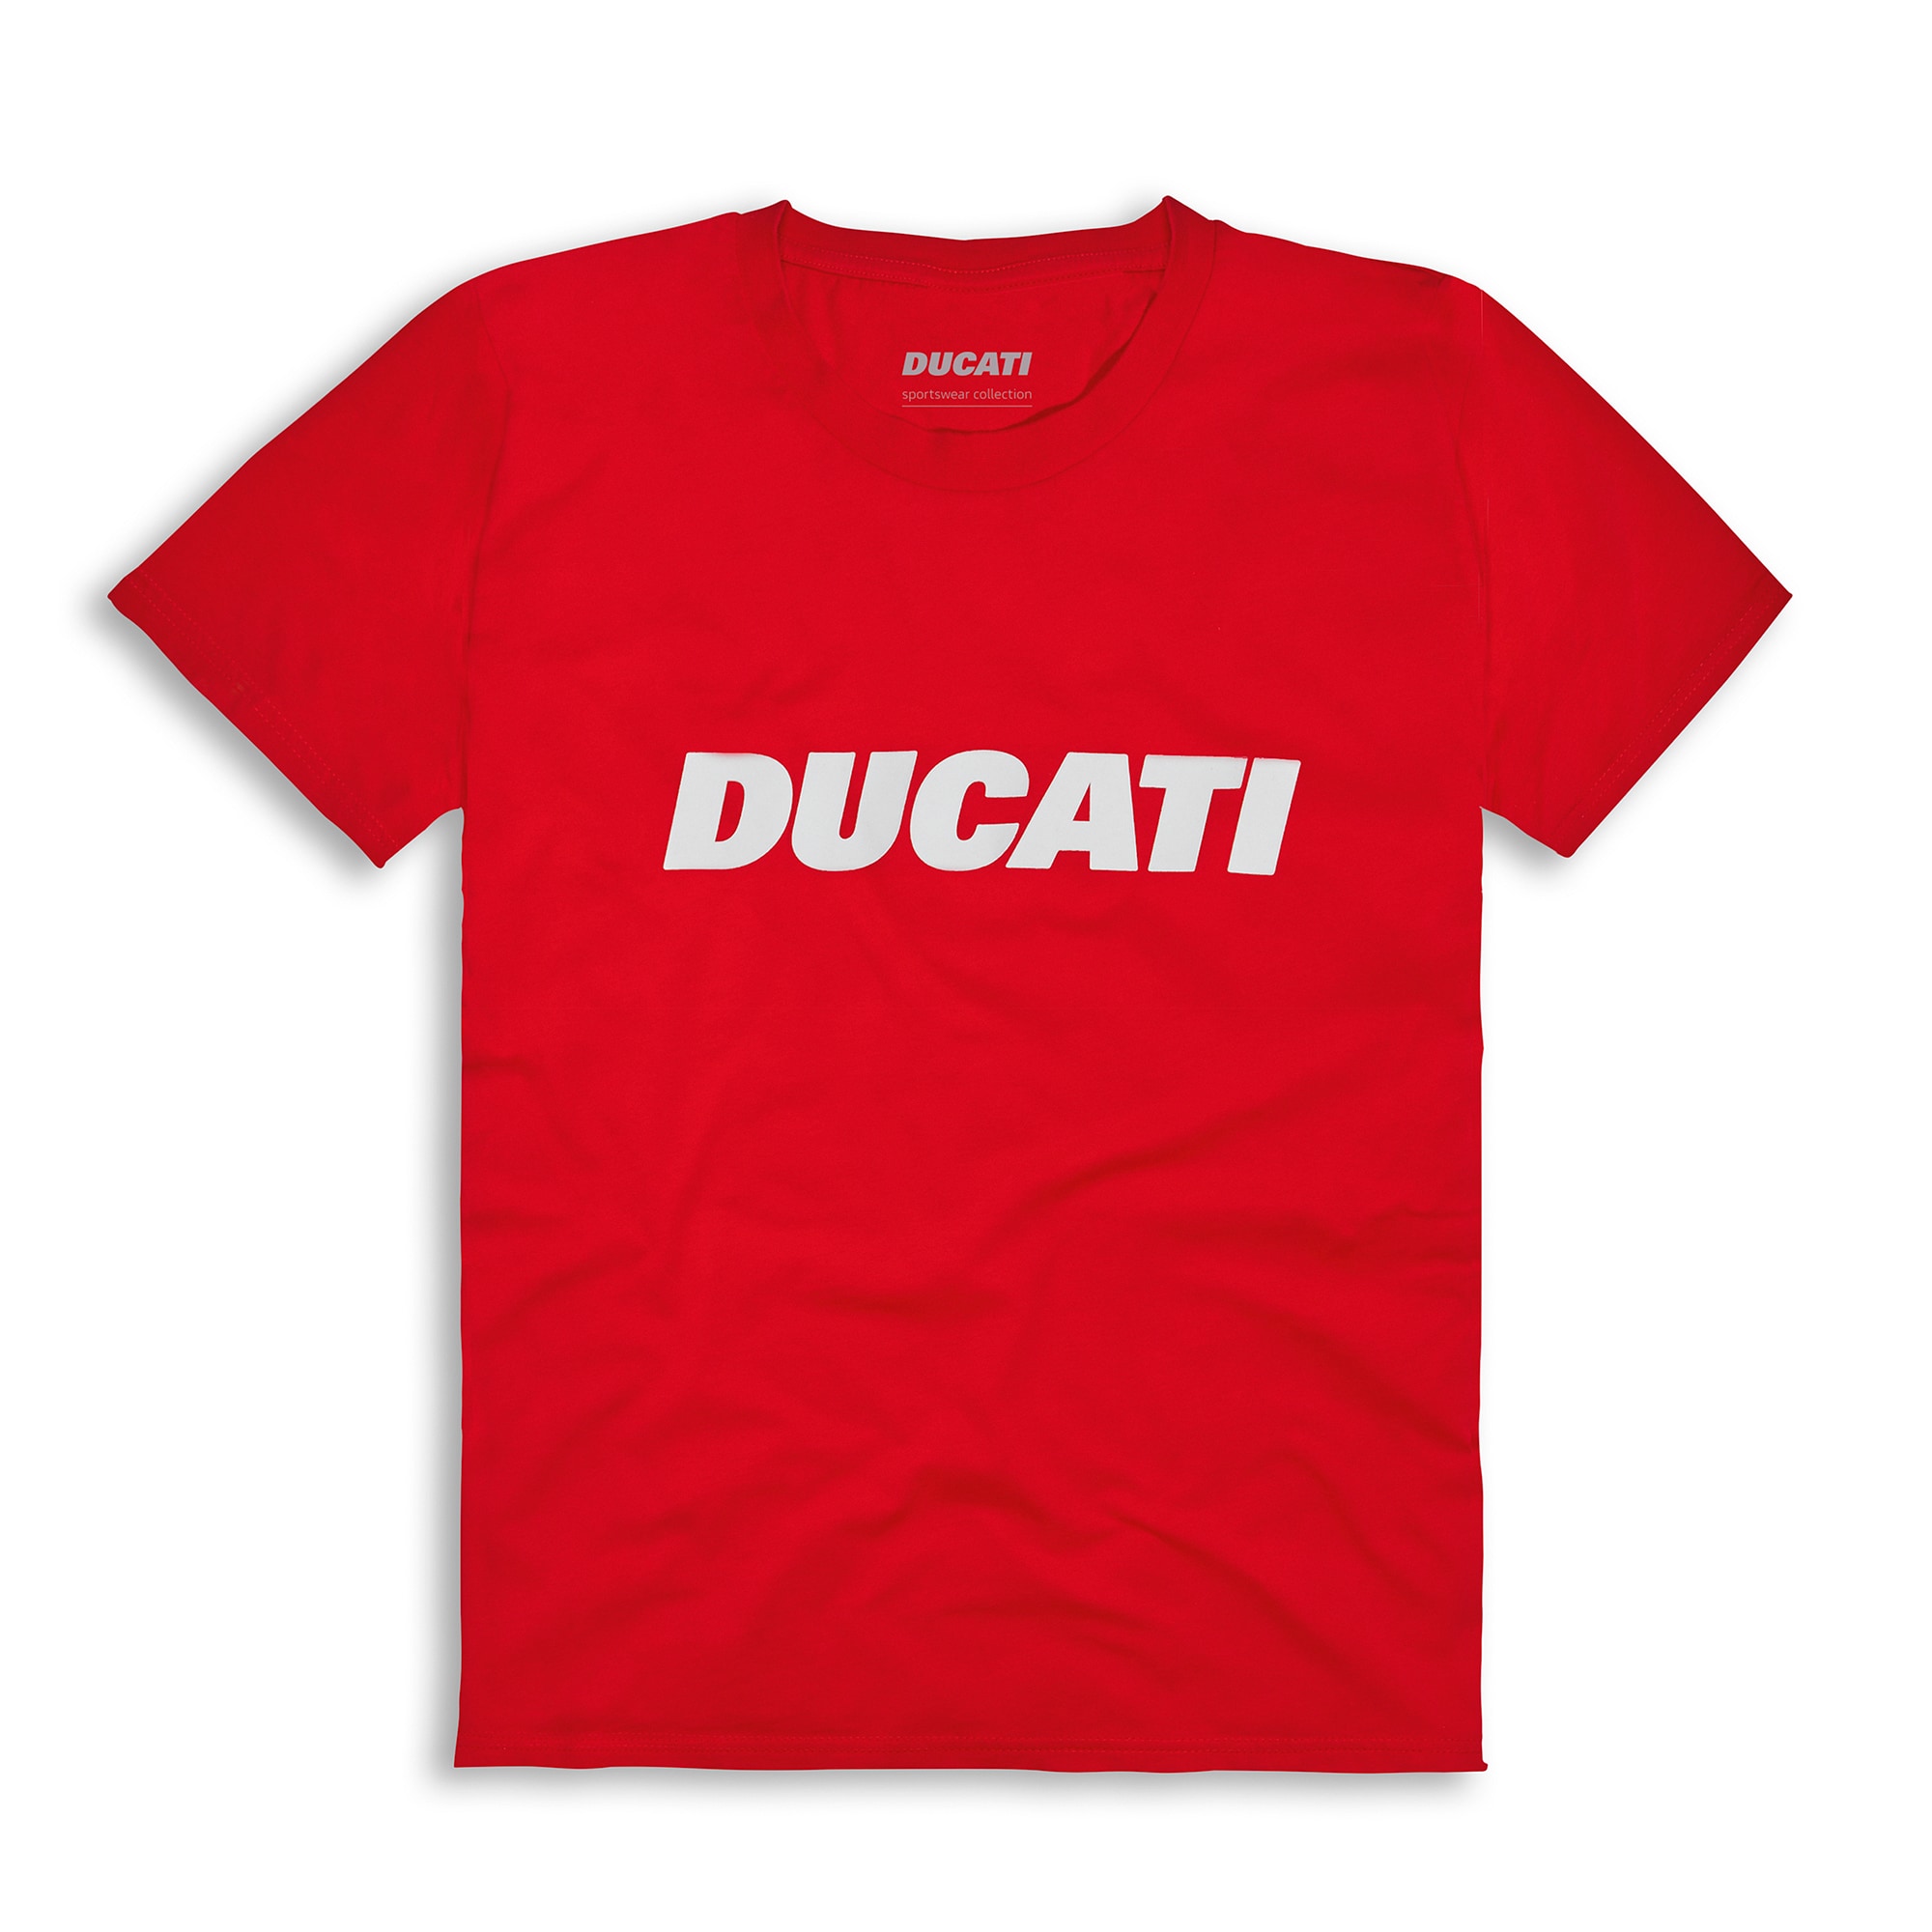 Ducati Ducatiana 2.0 - T-shirt - DUCPERFORMANCE | Genuine OEM Parts and ...